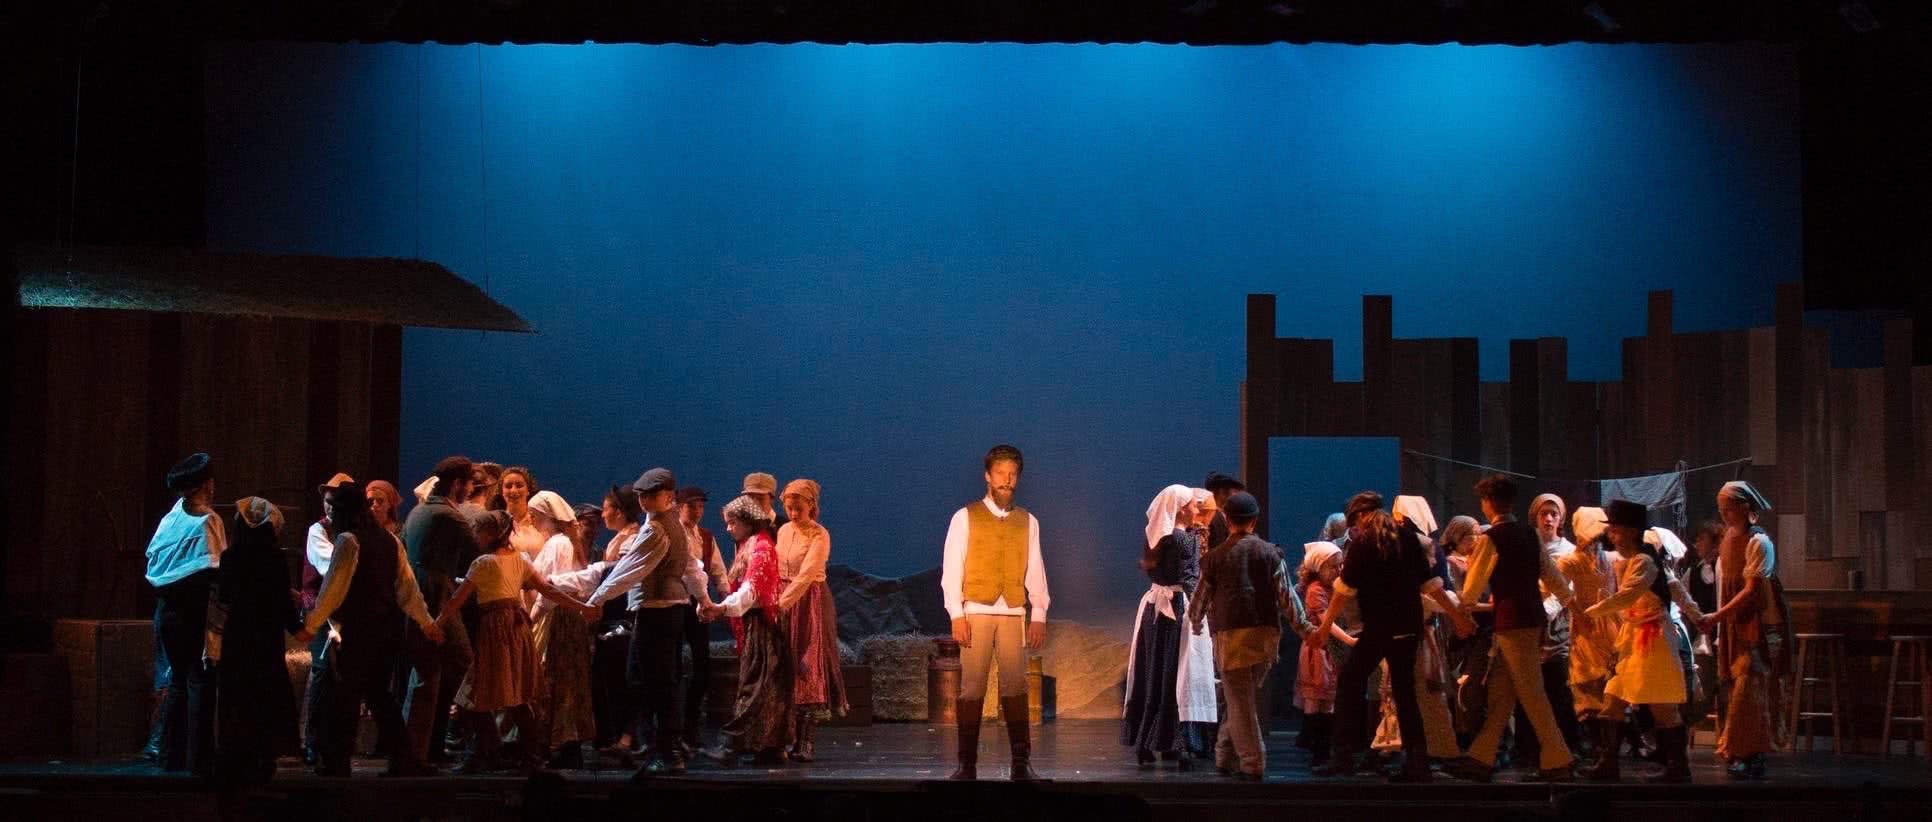 Tomorrow Youth Rep Banner image, from Fiddler on the Roof, 2016